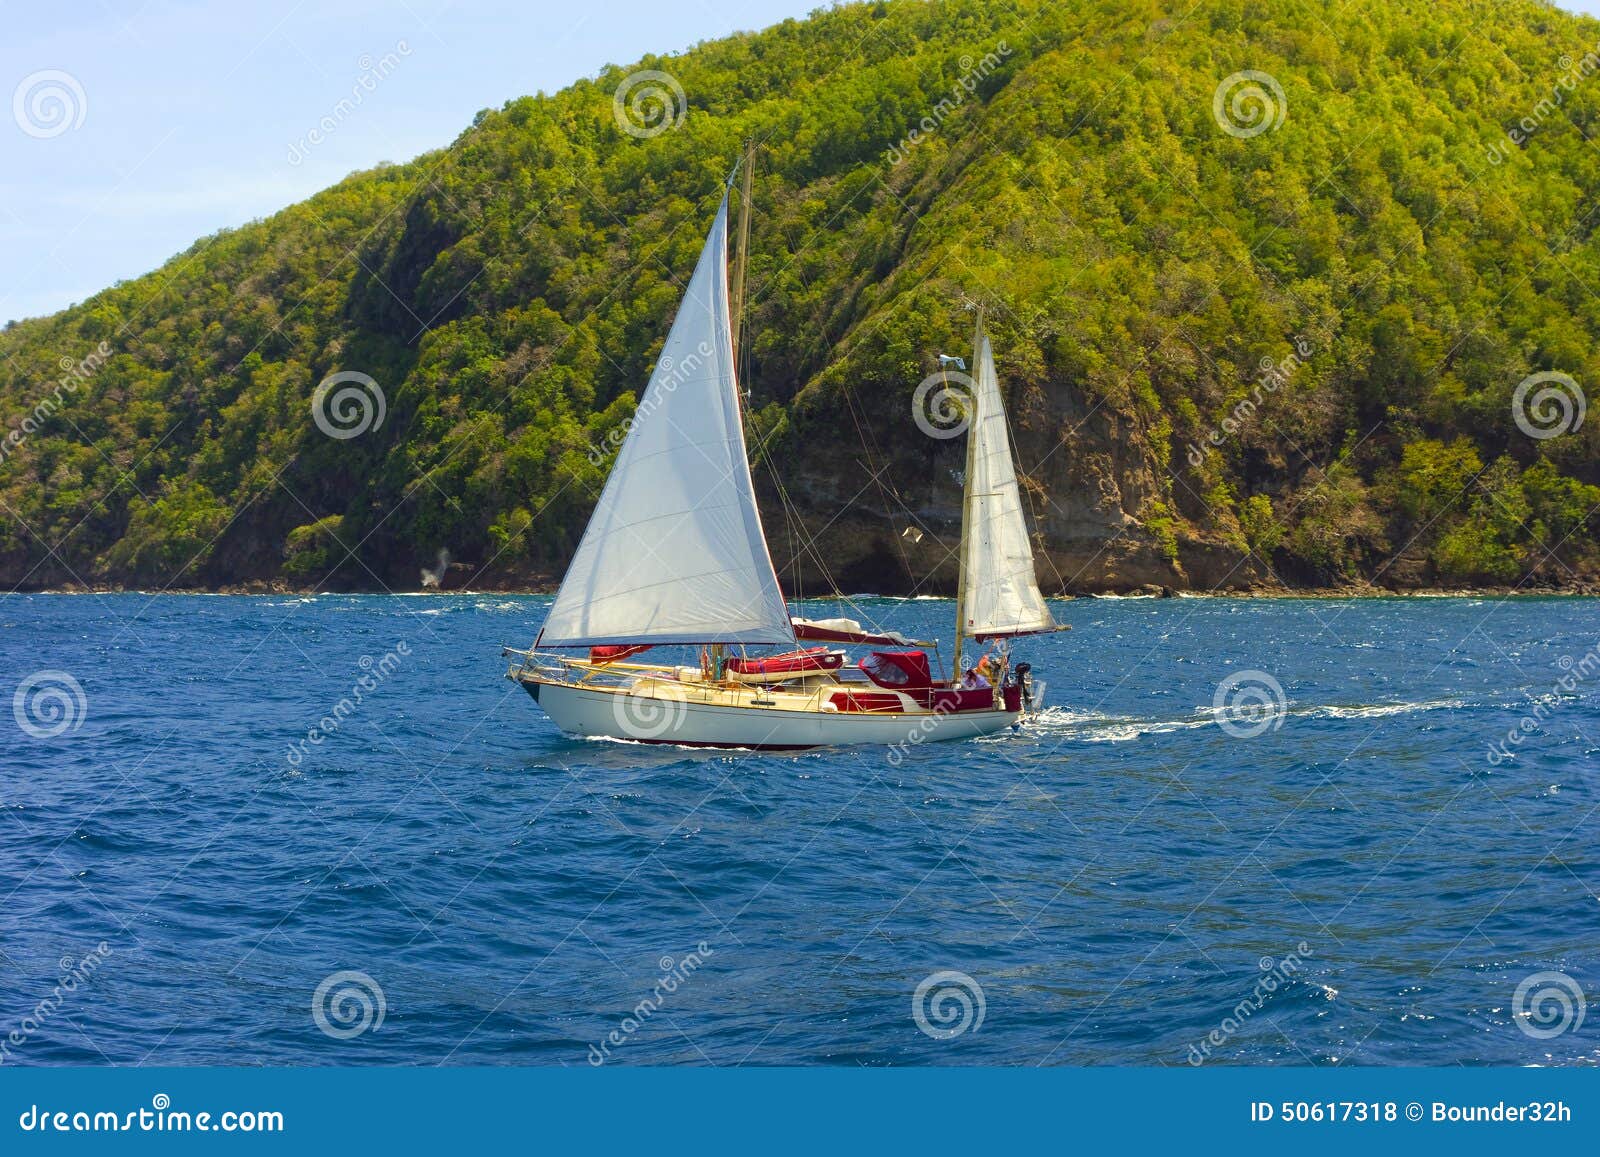 a small ketch sailing in the caribbean editorial stock